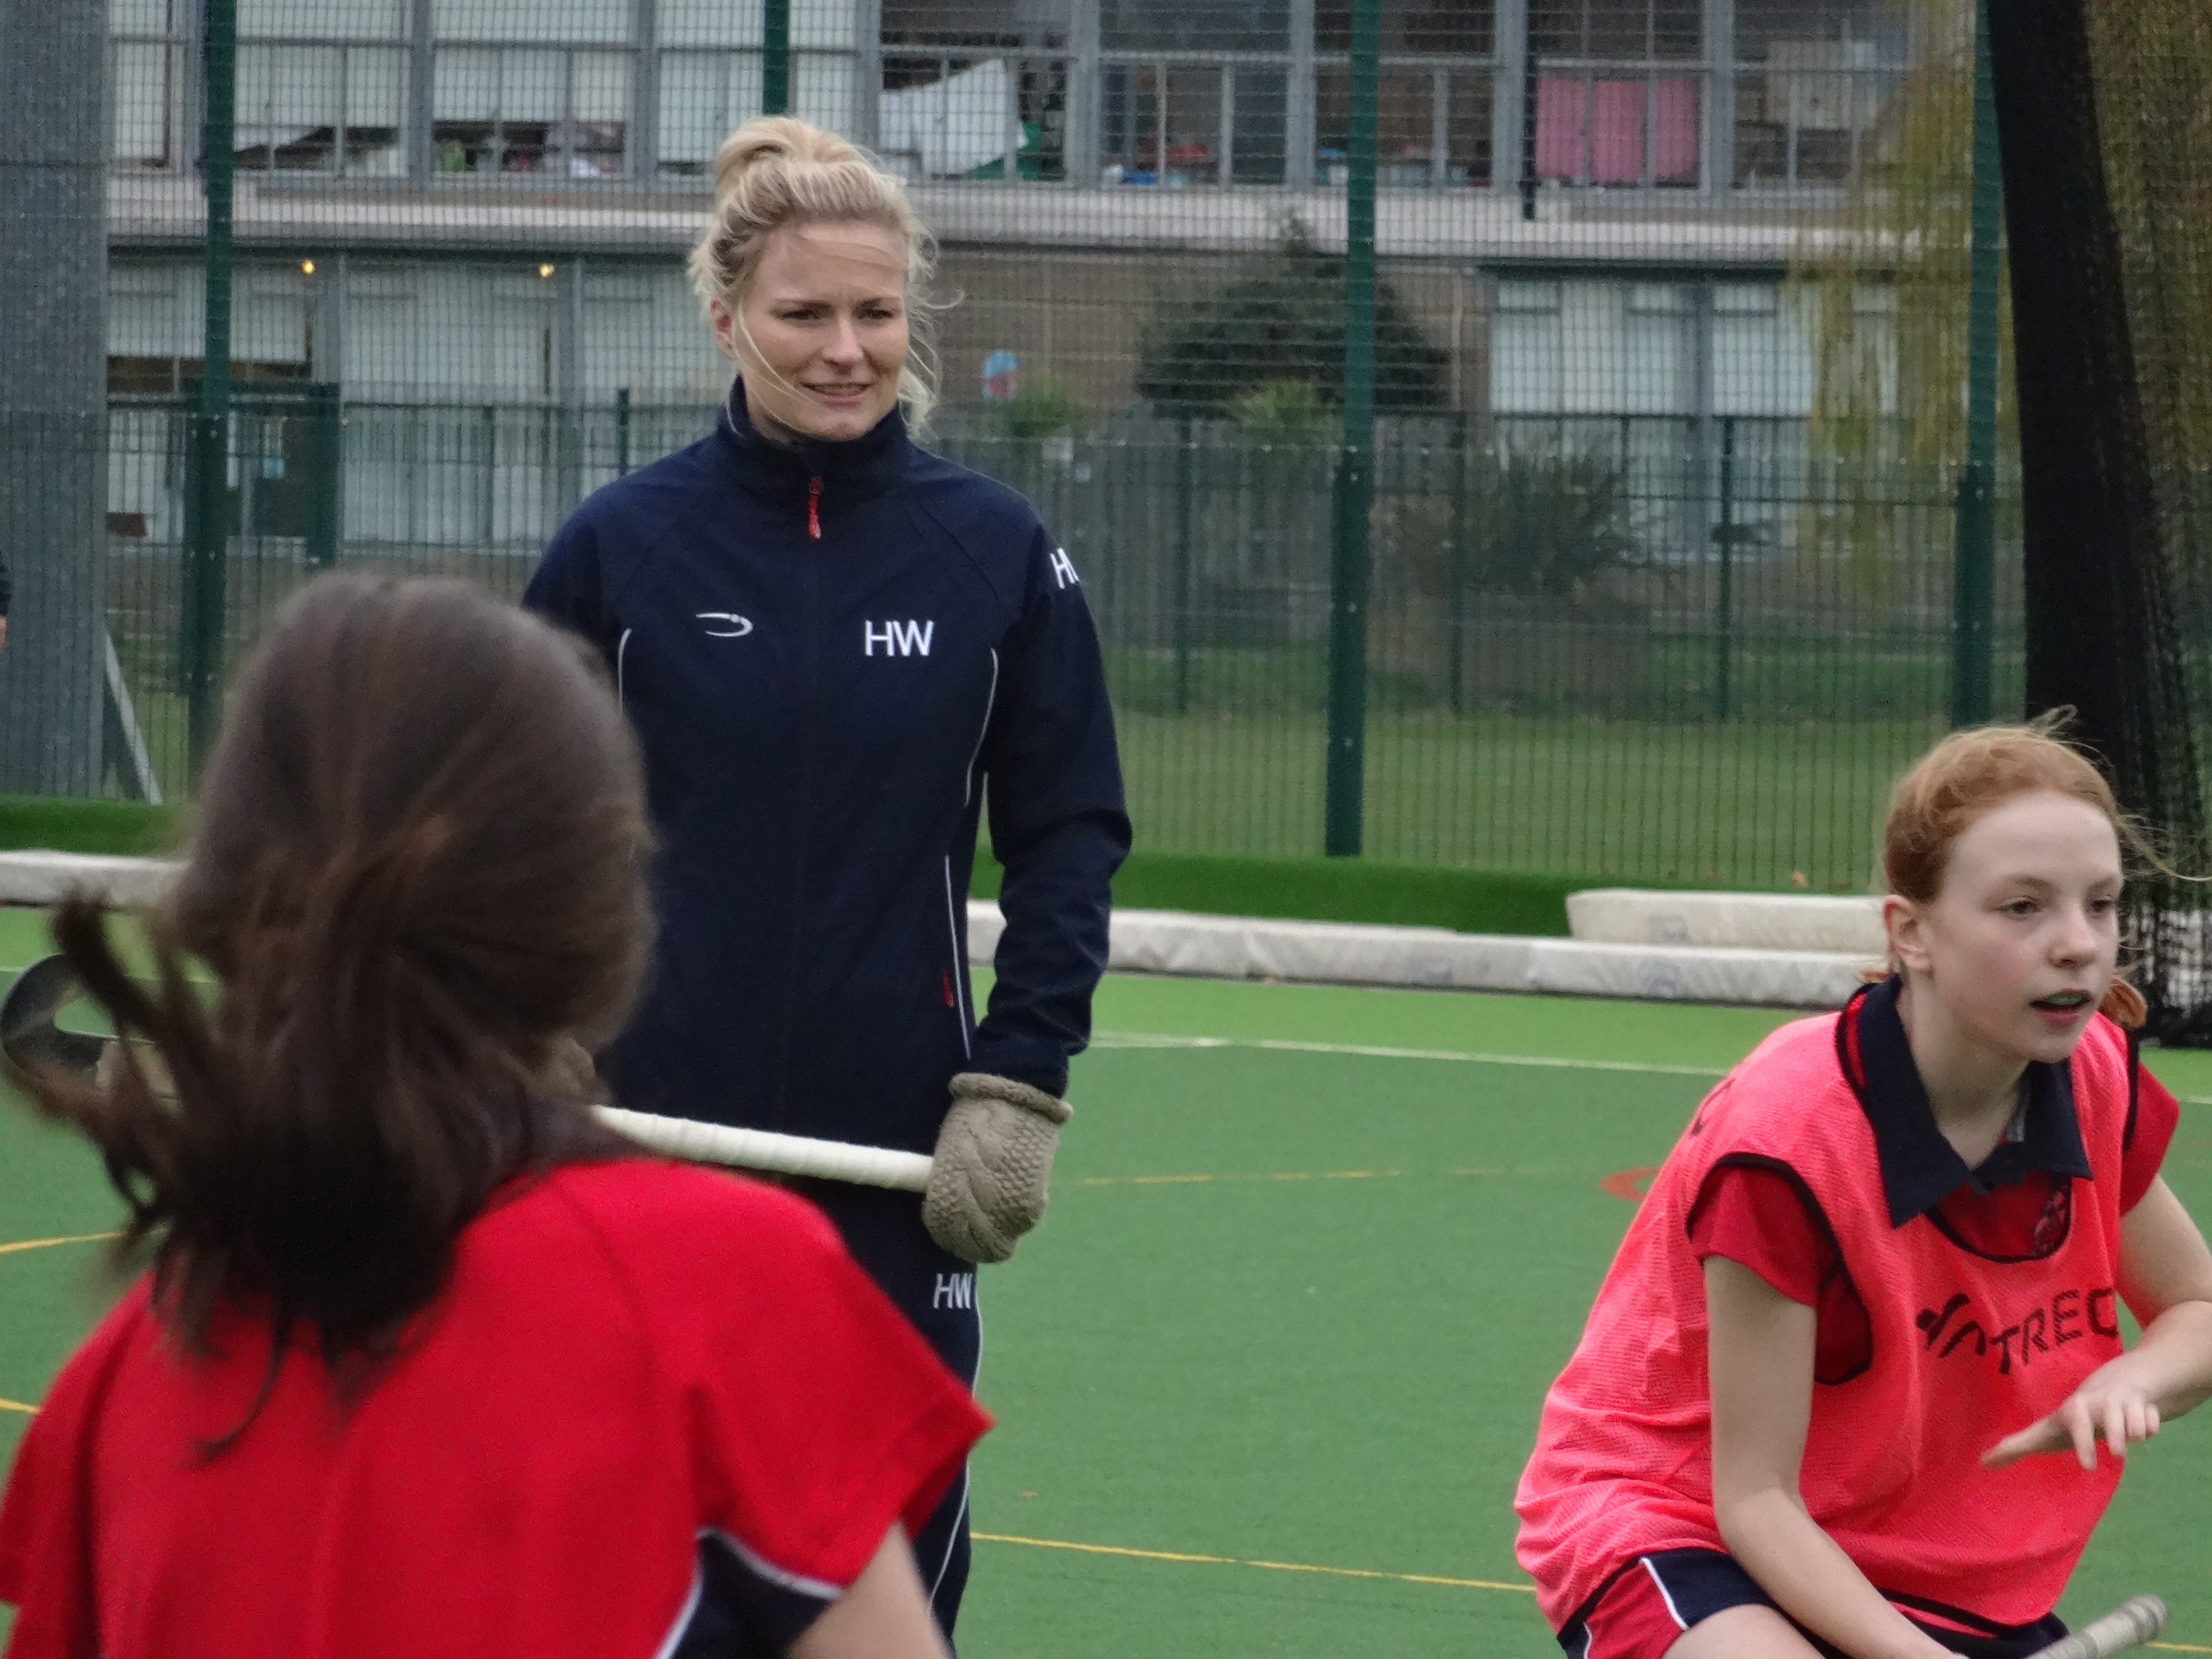 Dulwich hockey players get training from Olympic gold medallist